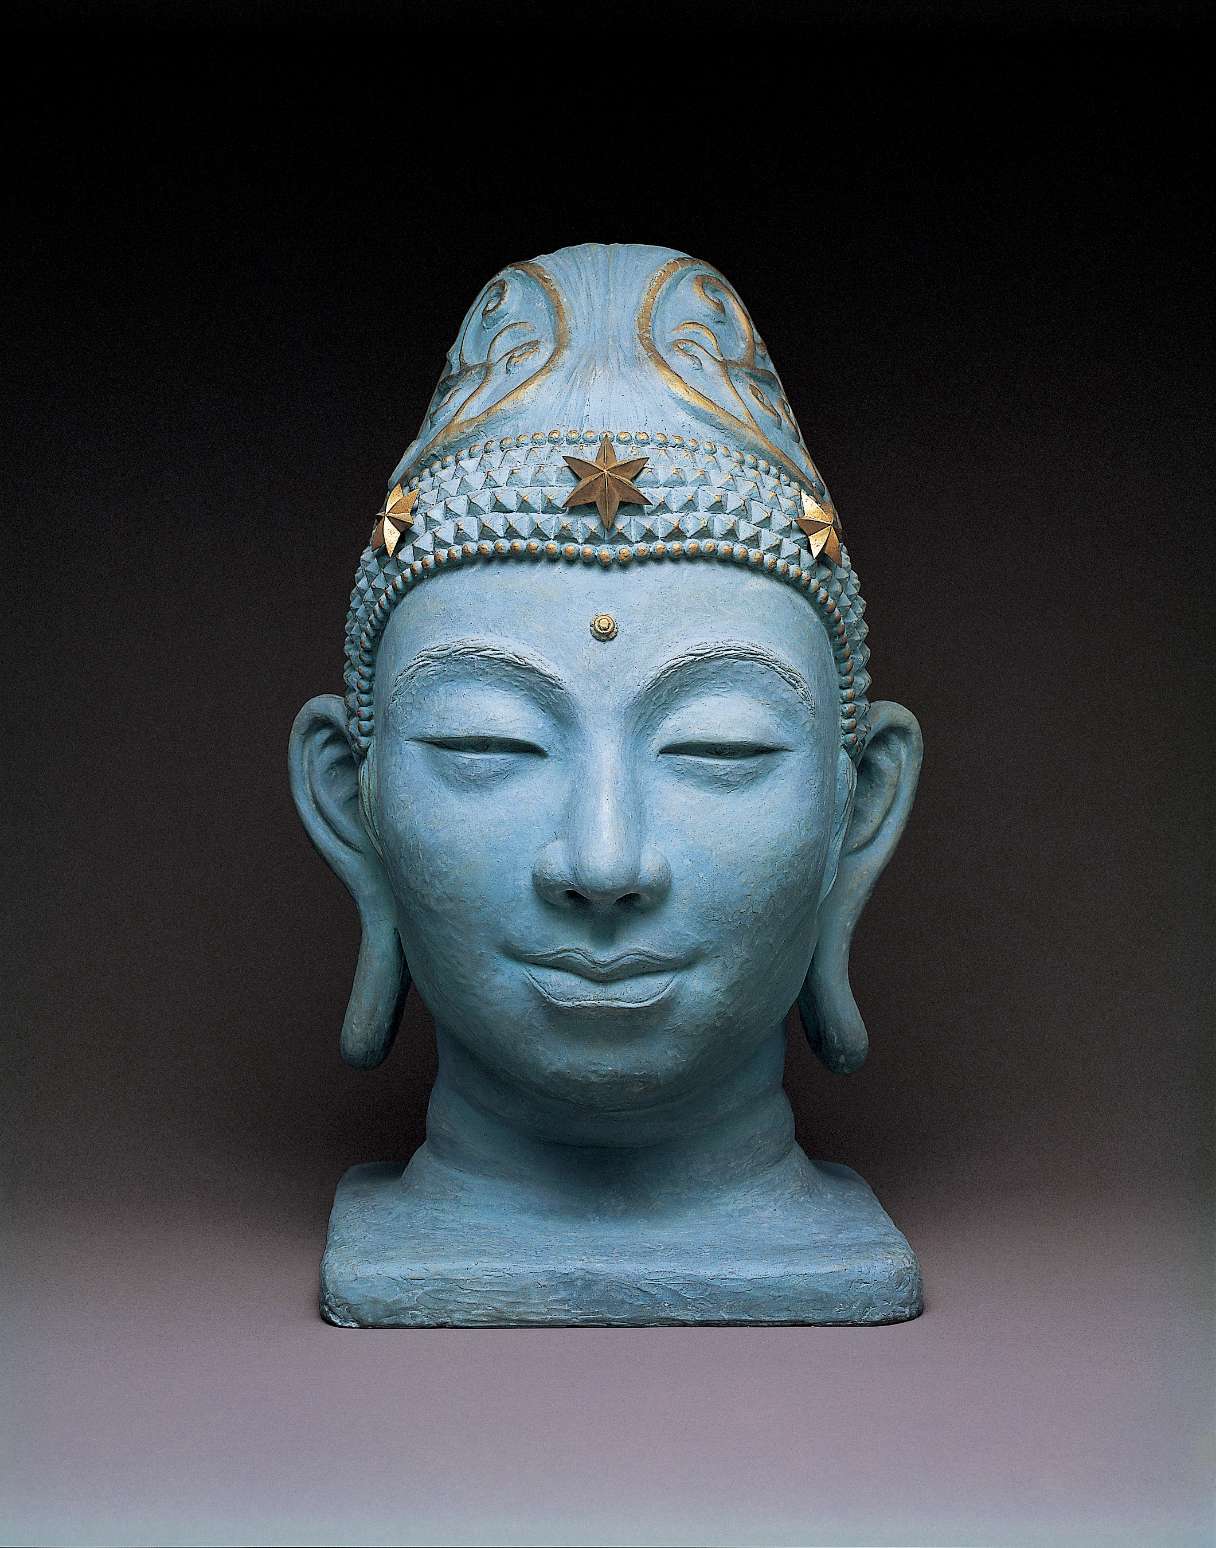 A light-bluish hued bust of a slightly smiling Buddha wearing a decorative headpiece embellished with golden highlights; the face looks like a person one might see, rather than a stylized icon.